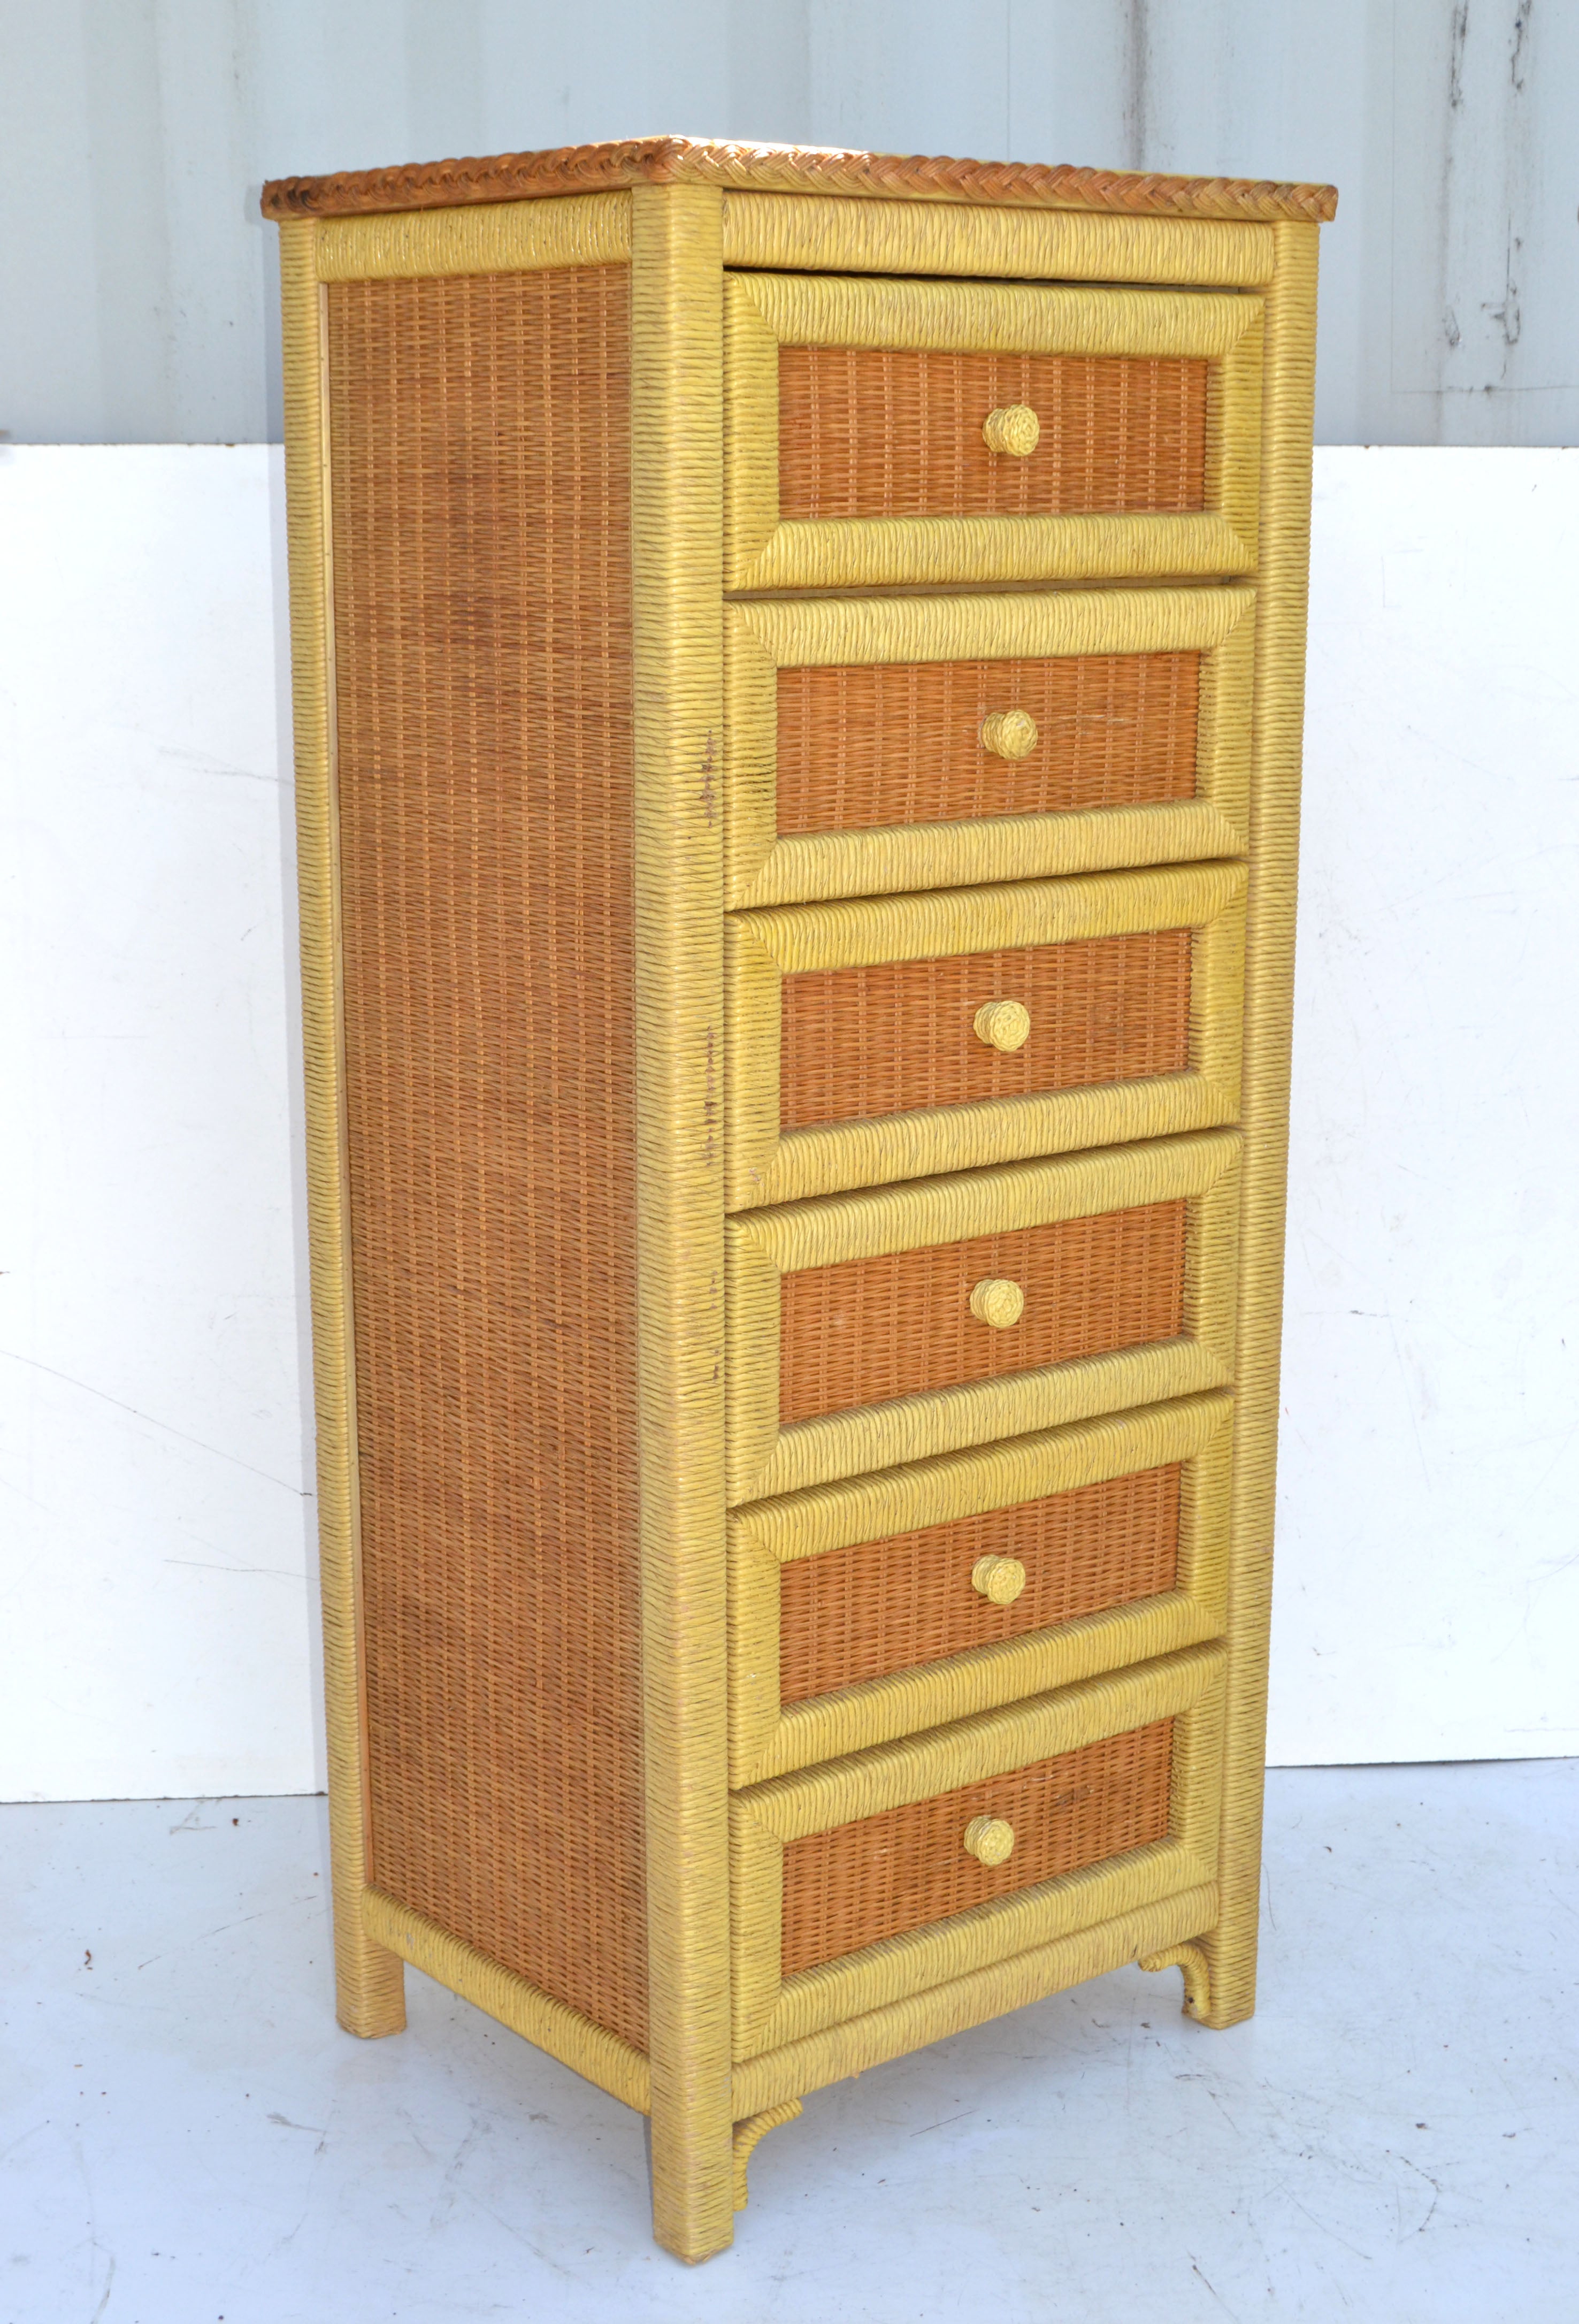 American Mid-Century Modern Wicker by Henry Link handcrafted Bachelor's Chest, Commode, Chest of 6 Drawers, Highboy made out of Bentwood Wicker, and hand woven cane. 
All original 1980s condition with some minor scuffs & breaks due to age and